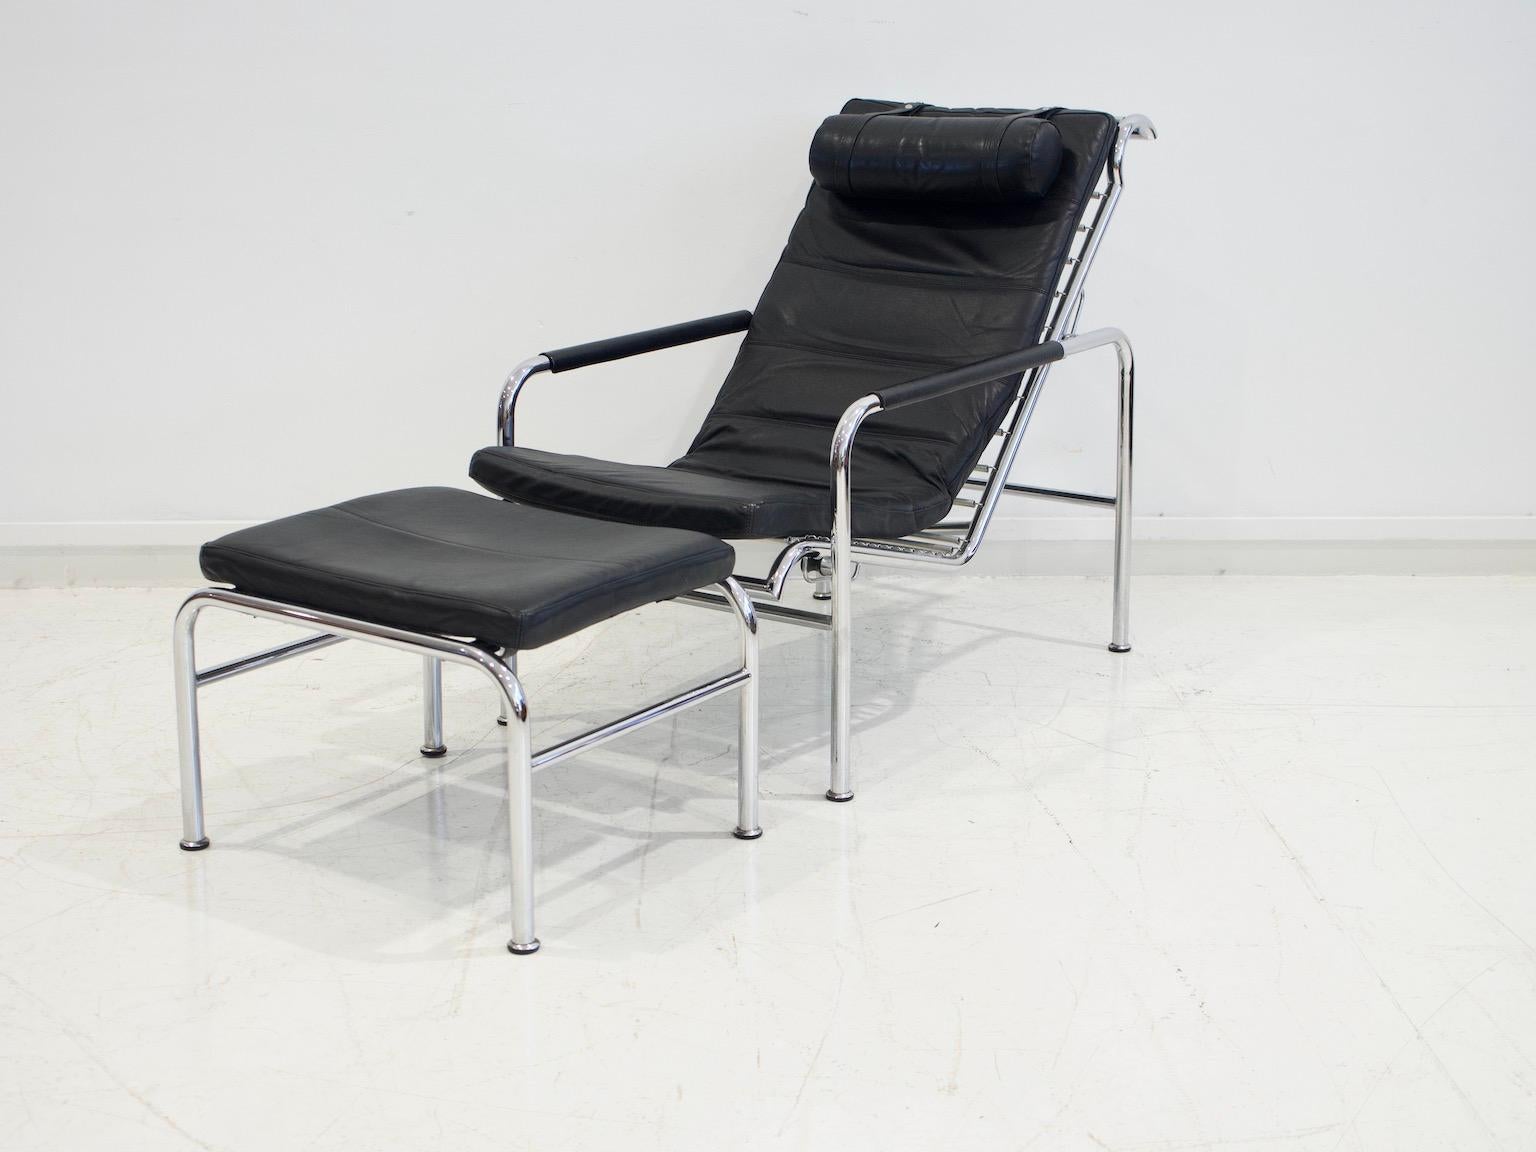 Black leather upholstered 'Genni' recliner armchair with footrest by Gabriele Mucchi for Zanotta. Designed in 1935, re-produced in 1981. Frame made of chromed tubular steel, back and seat of steel springs, upholstery and neck roll made of black